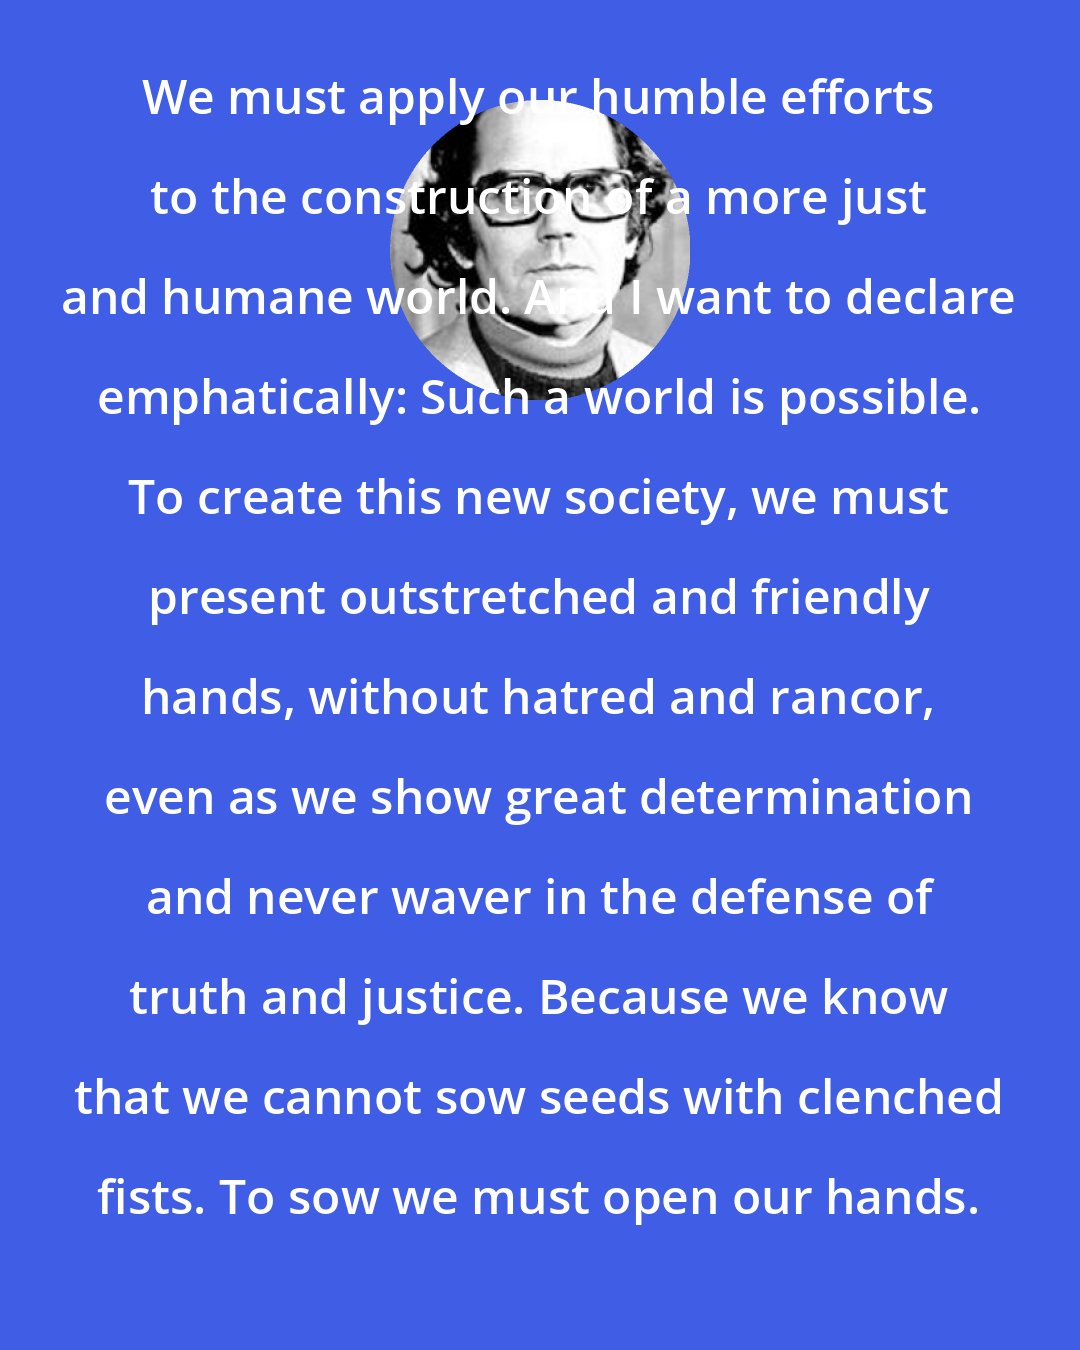 Adolfo Perez Esquivel: We must apply our humble efforts to the construction of a more just and humane world. And I want to declare emphatically: Such a world is possible. To create this new society, we must present outstretched and friendly hands, without hatred and rancor, even as we show great determination and never waver in the defense of truth and justice. Because we know that we cannot sow seeds with clenched fists. To sow we must open our hands.